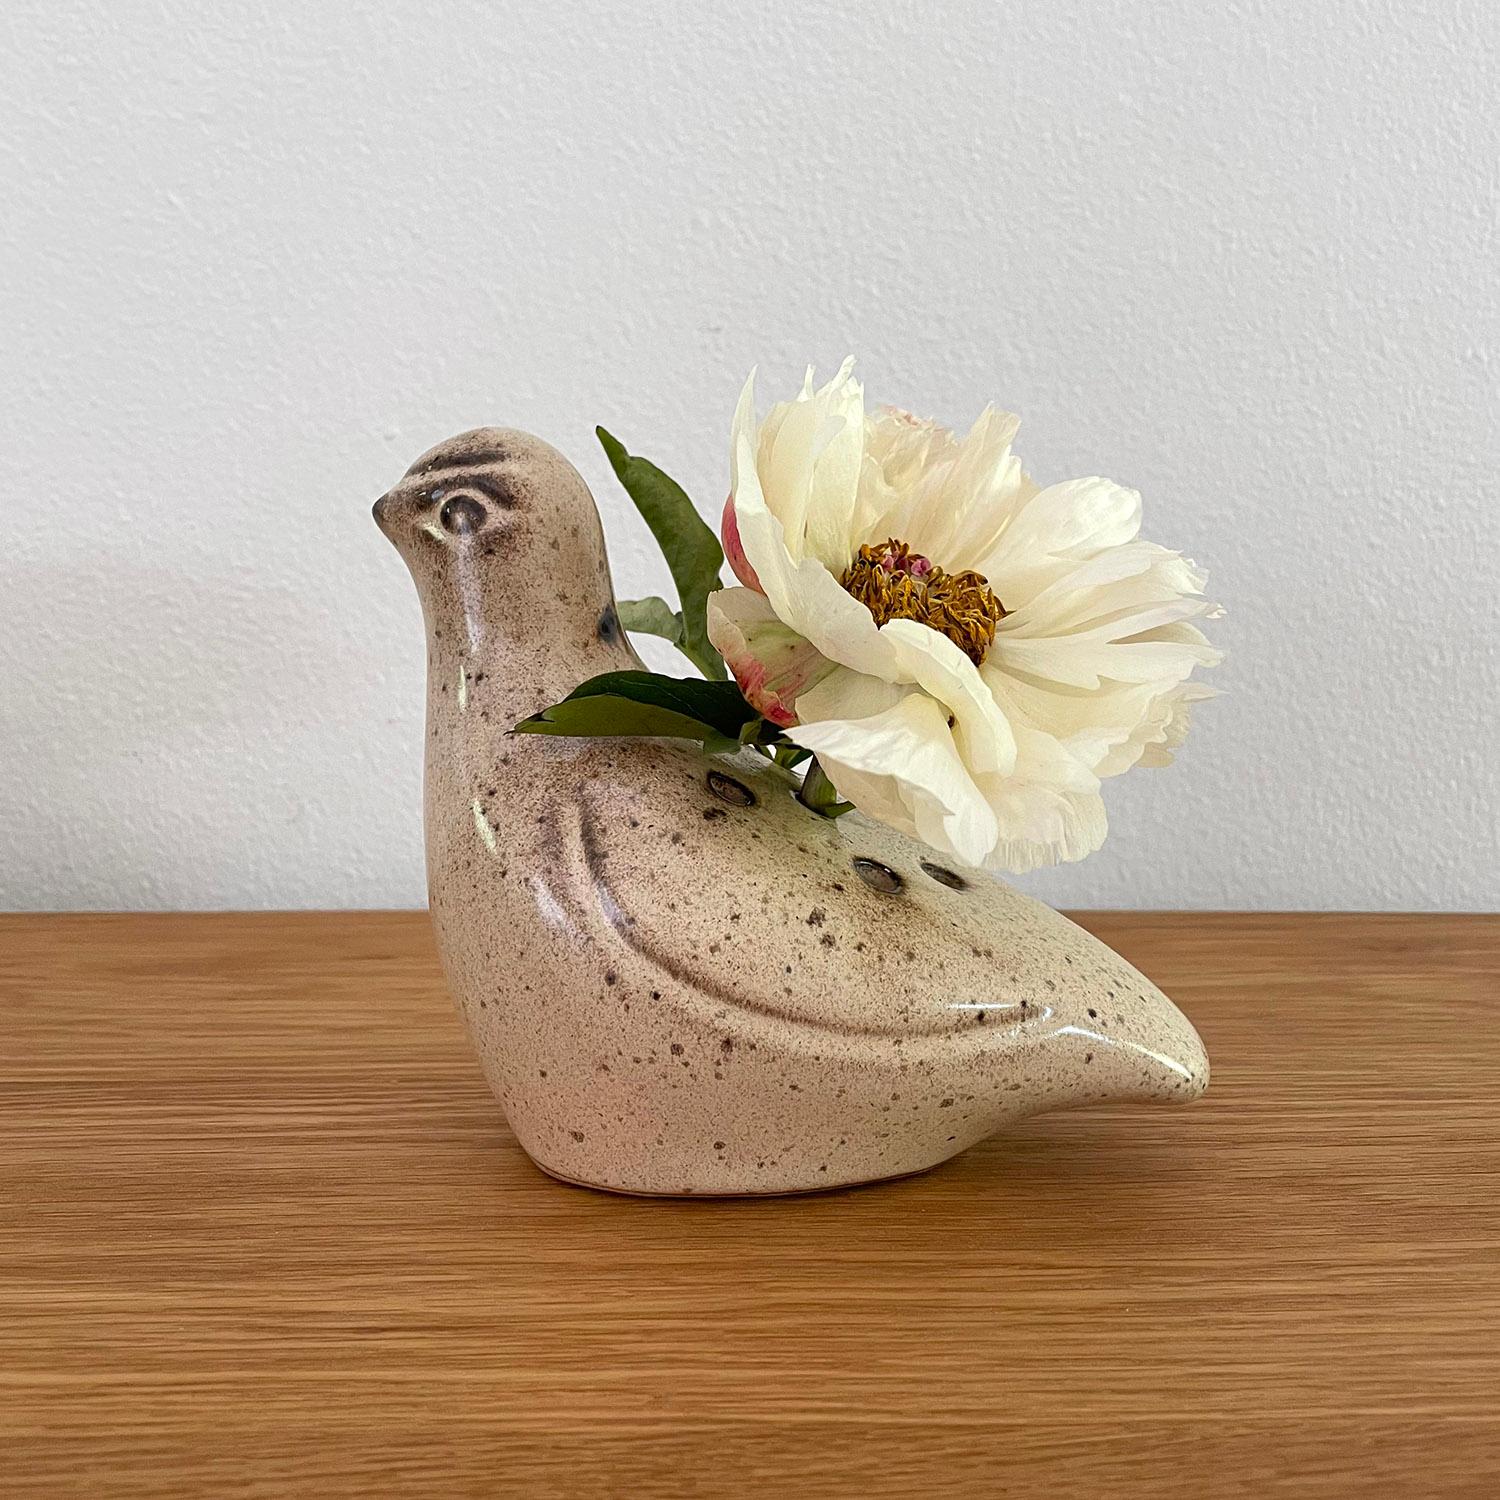 French ceramic dove vase
France, circa 1960’s
Doves are often declared messengers and symbols of love and peace
Petite vase with frog holes for optimal flower arrangement
Patina from age and use
Vessel has not been tested to hold water